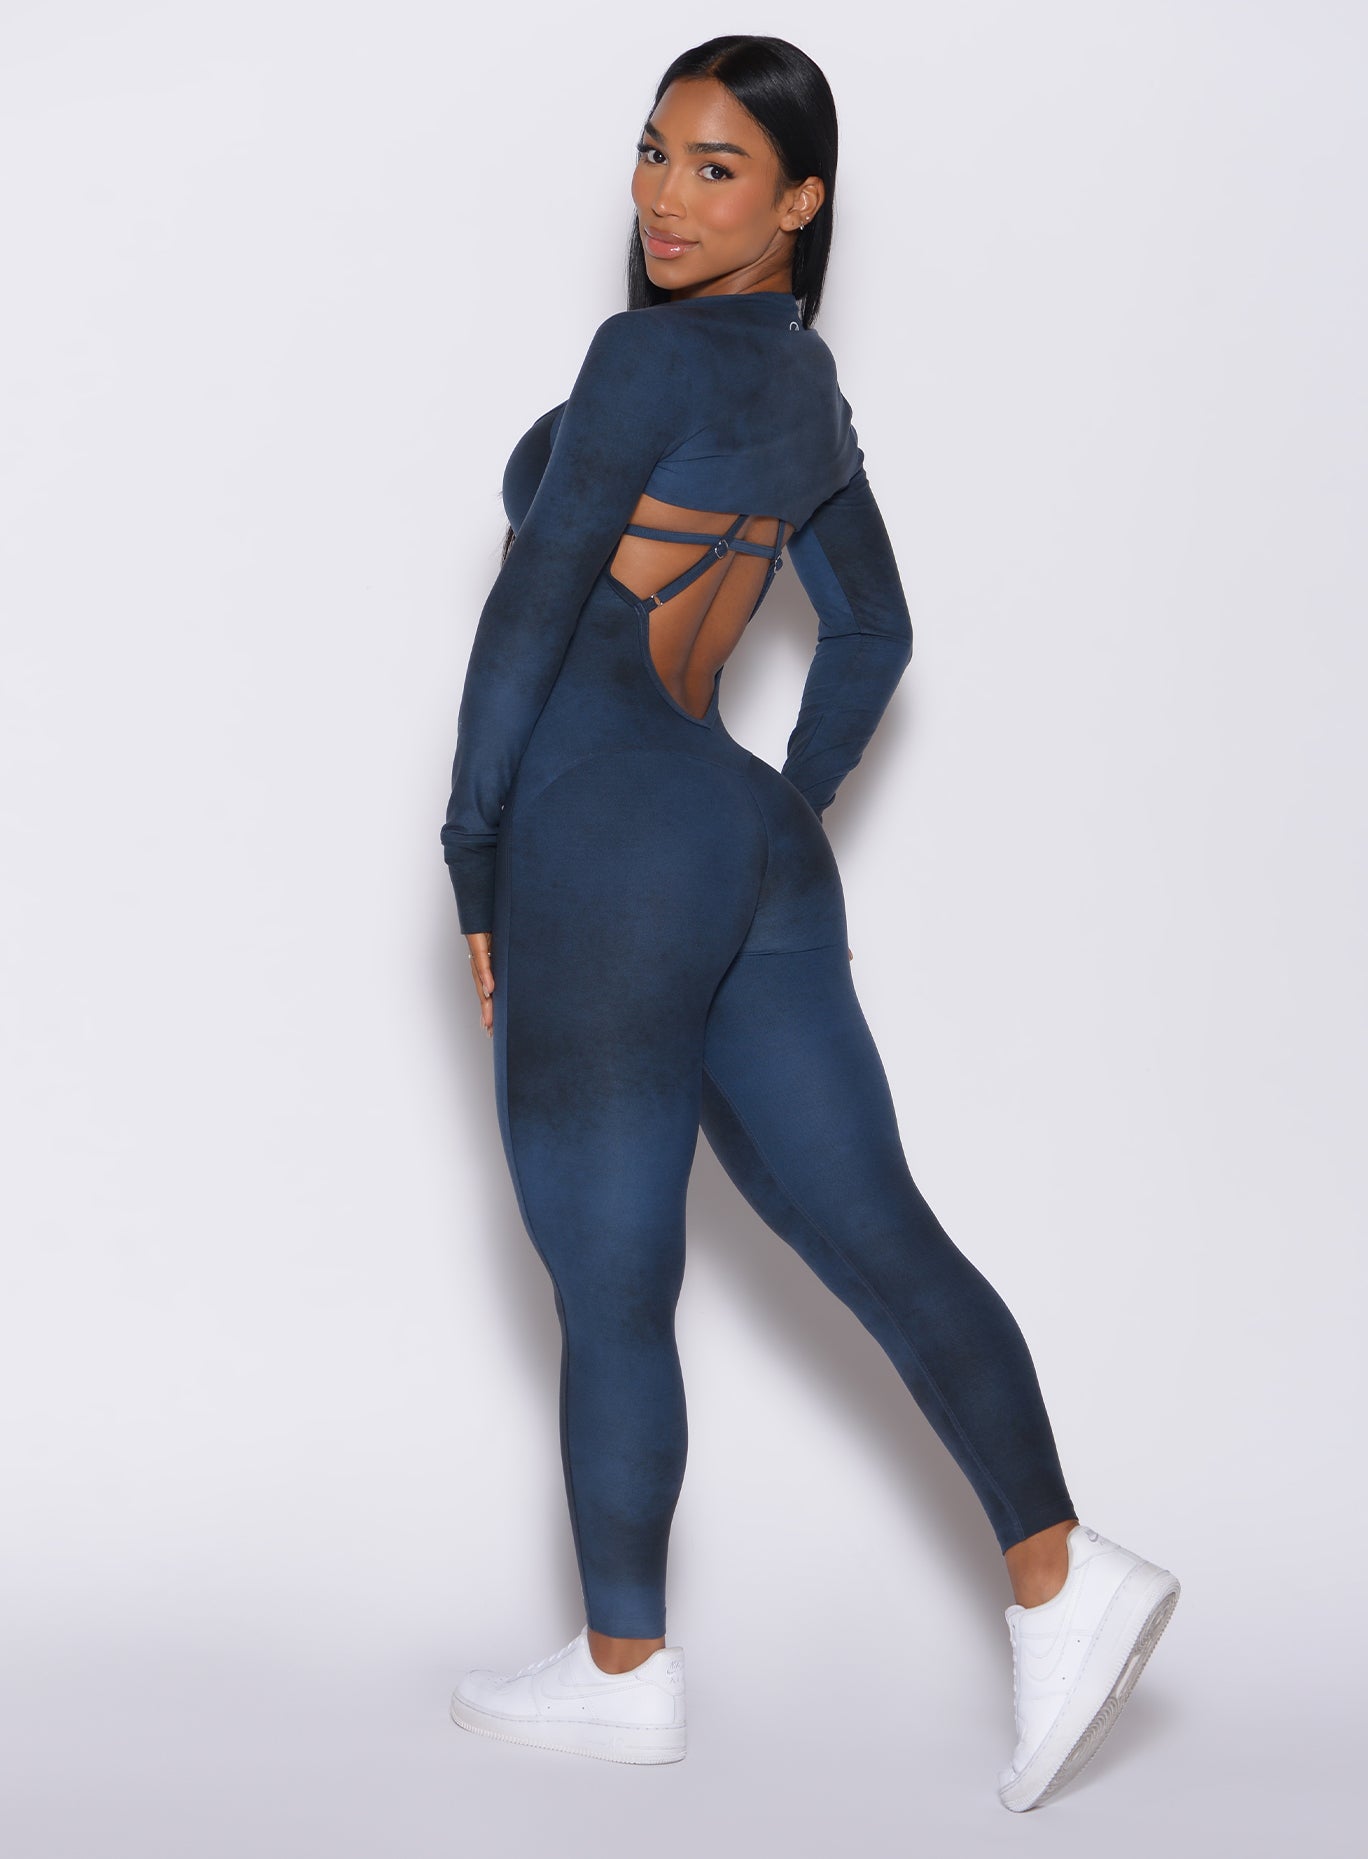 Left side profile view of a model in our Sculpt Bodysuit in Vintage blue color along with the matching shape shrug